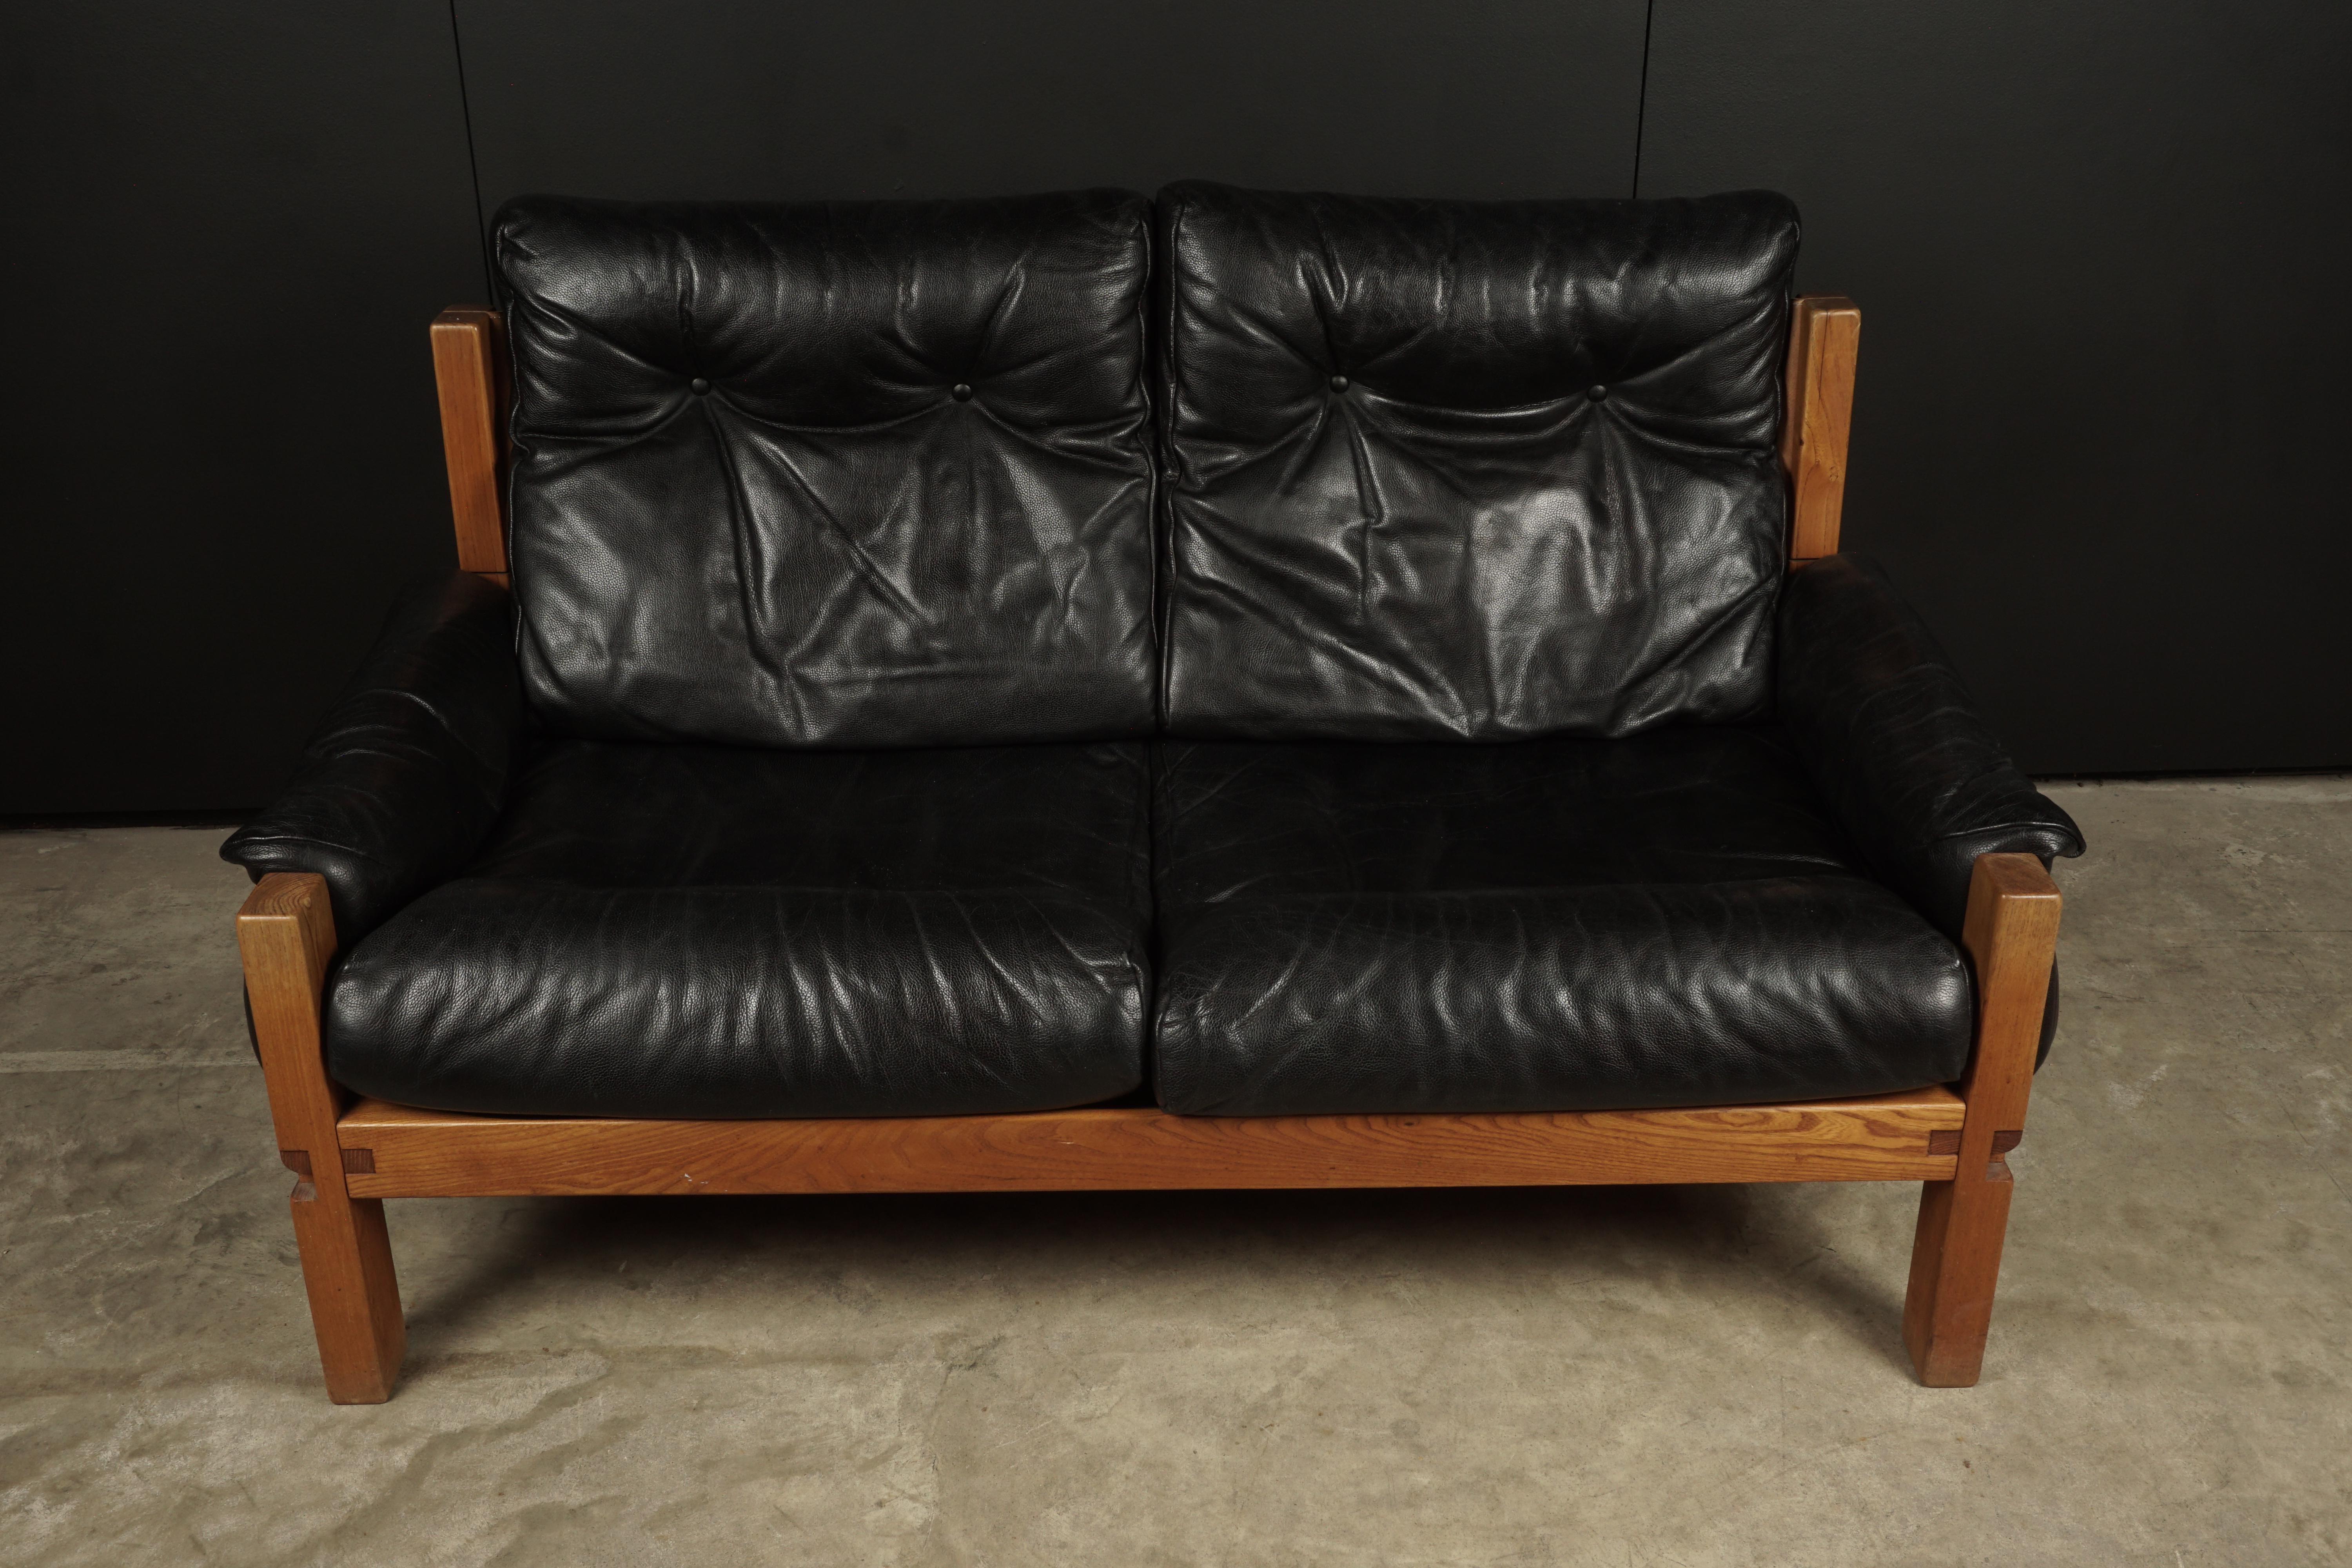 Vintage leather loveseat designed by Pierre Chapo, France 1950s. Solid elm construction with cognac leather straps. Black leather cushions with light patina and wear. Superb quality.